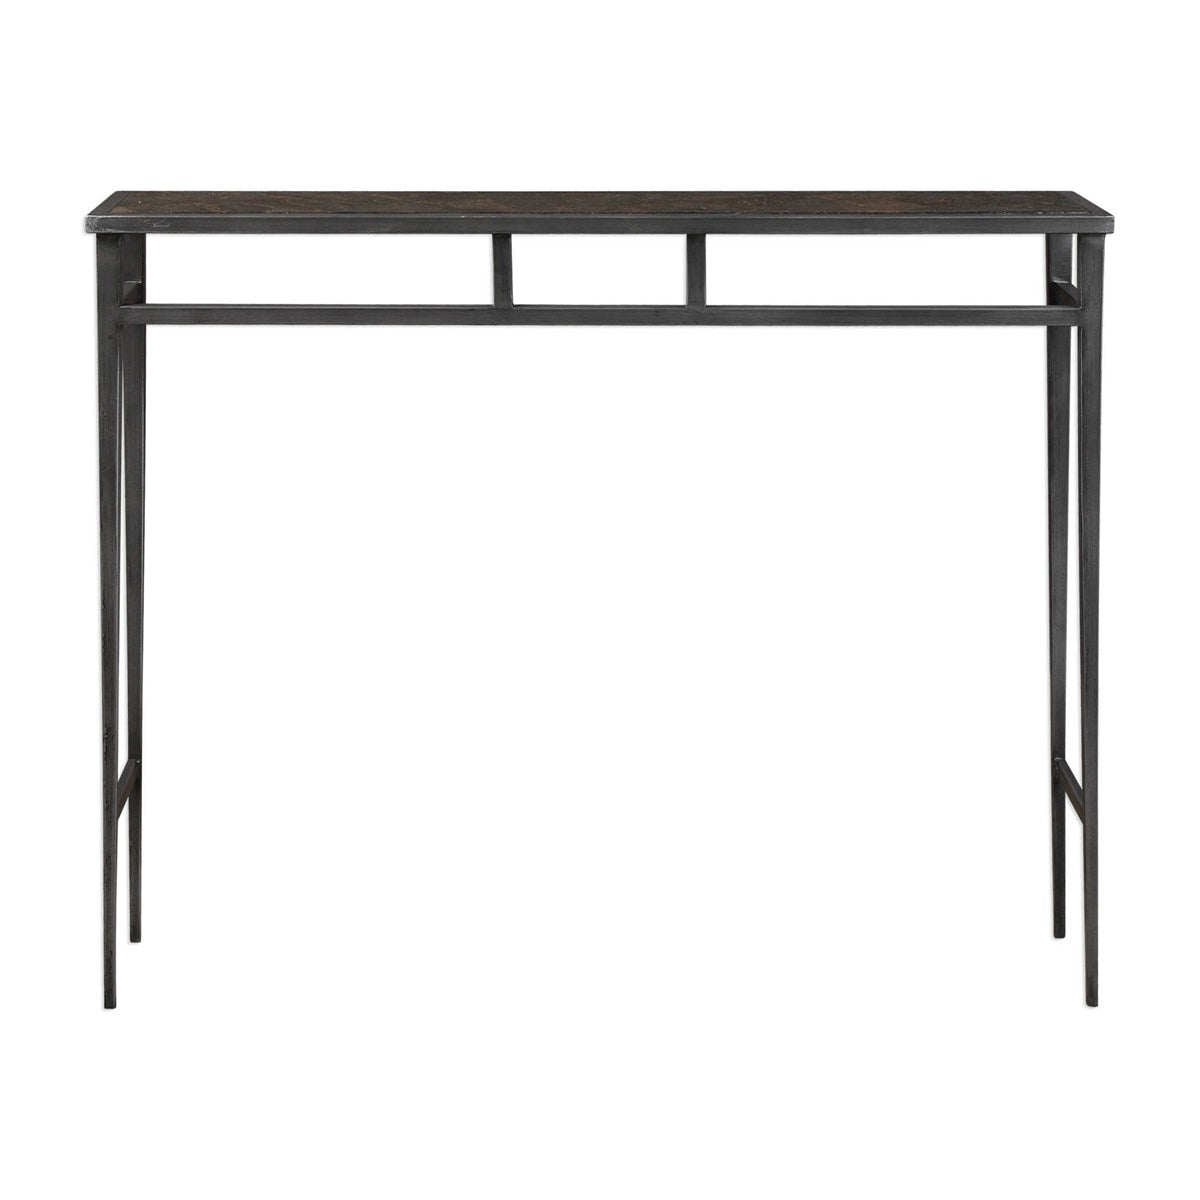 Firman Console Table - RSVP Style